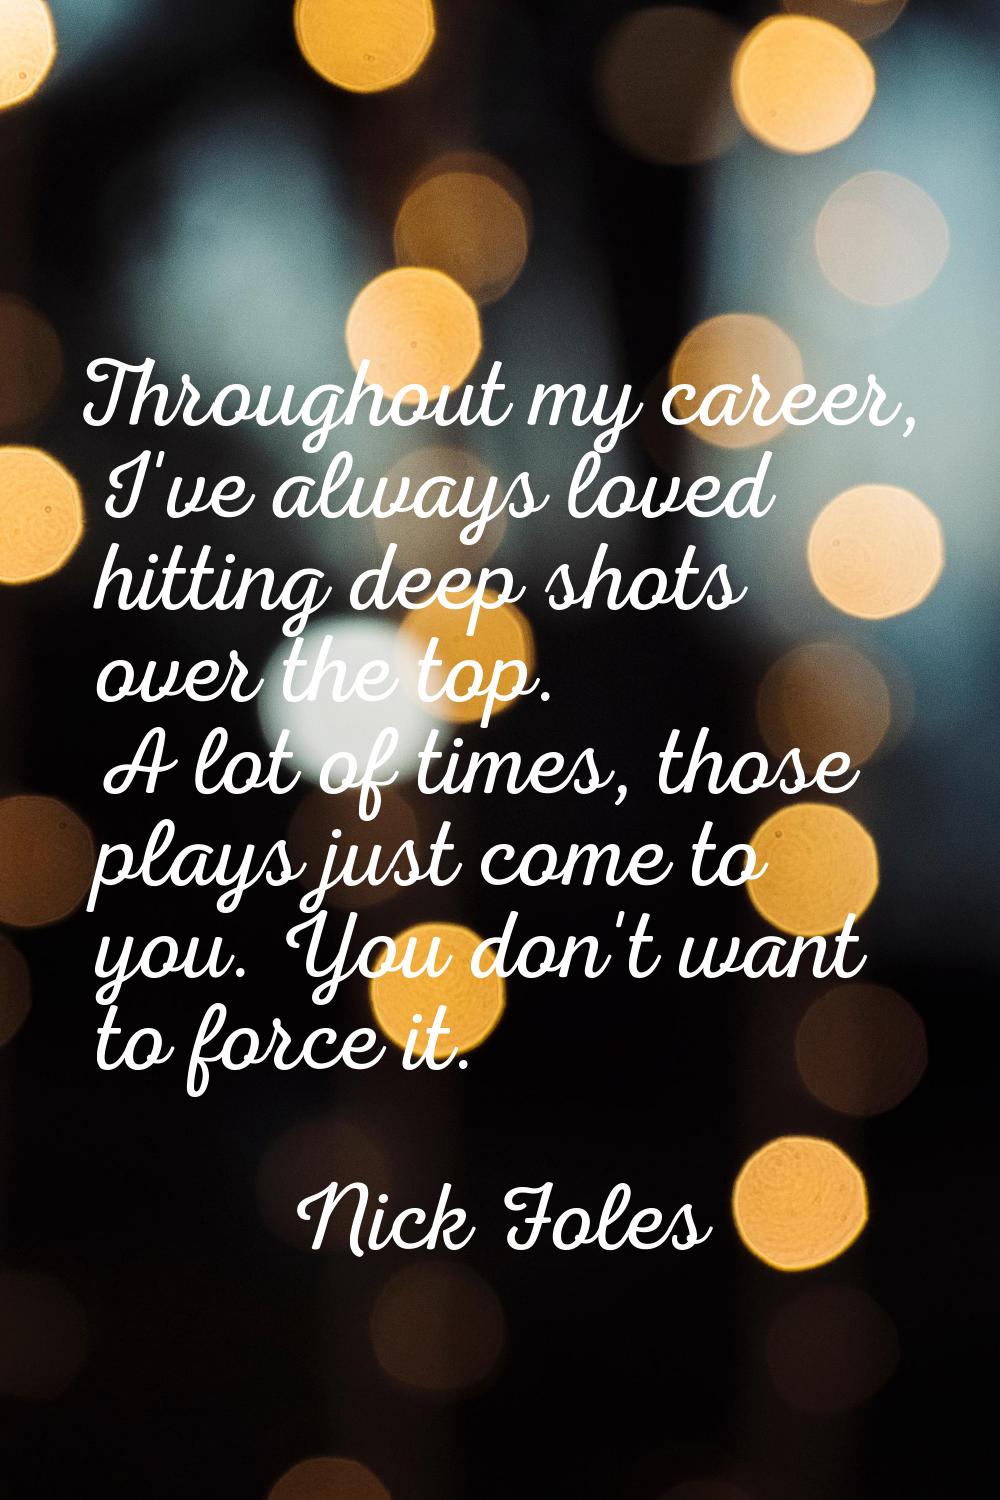 Throughout my career, I've always loved hitting deep shots over the top. A lot of times, those play